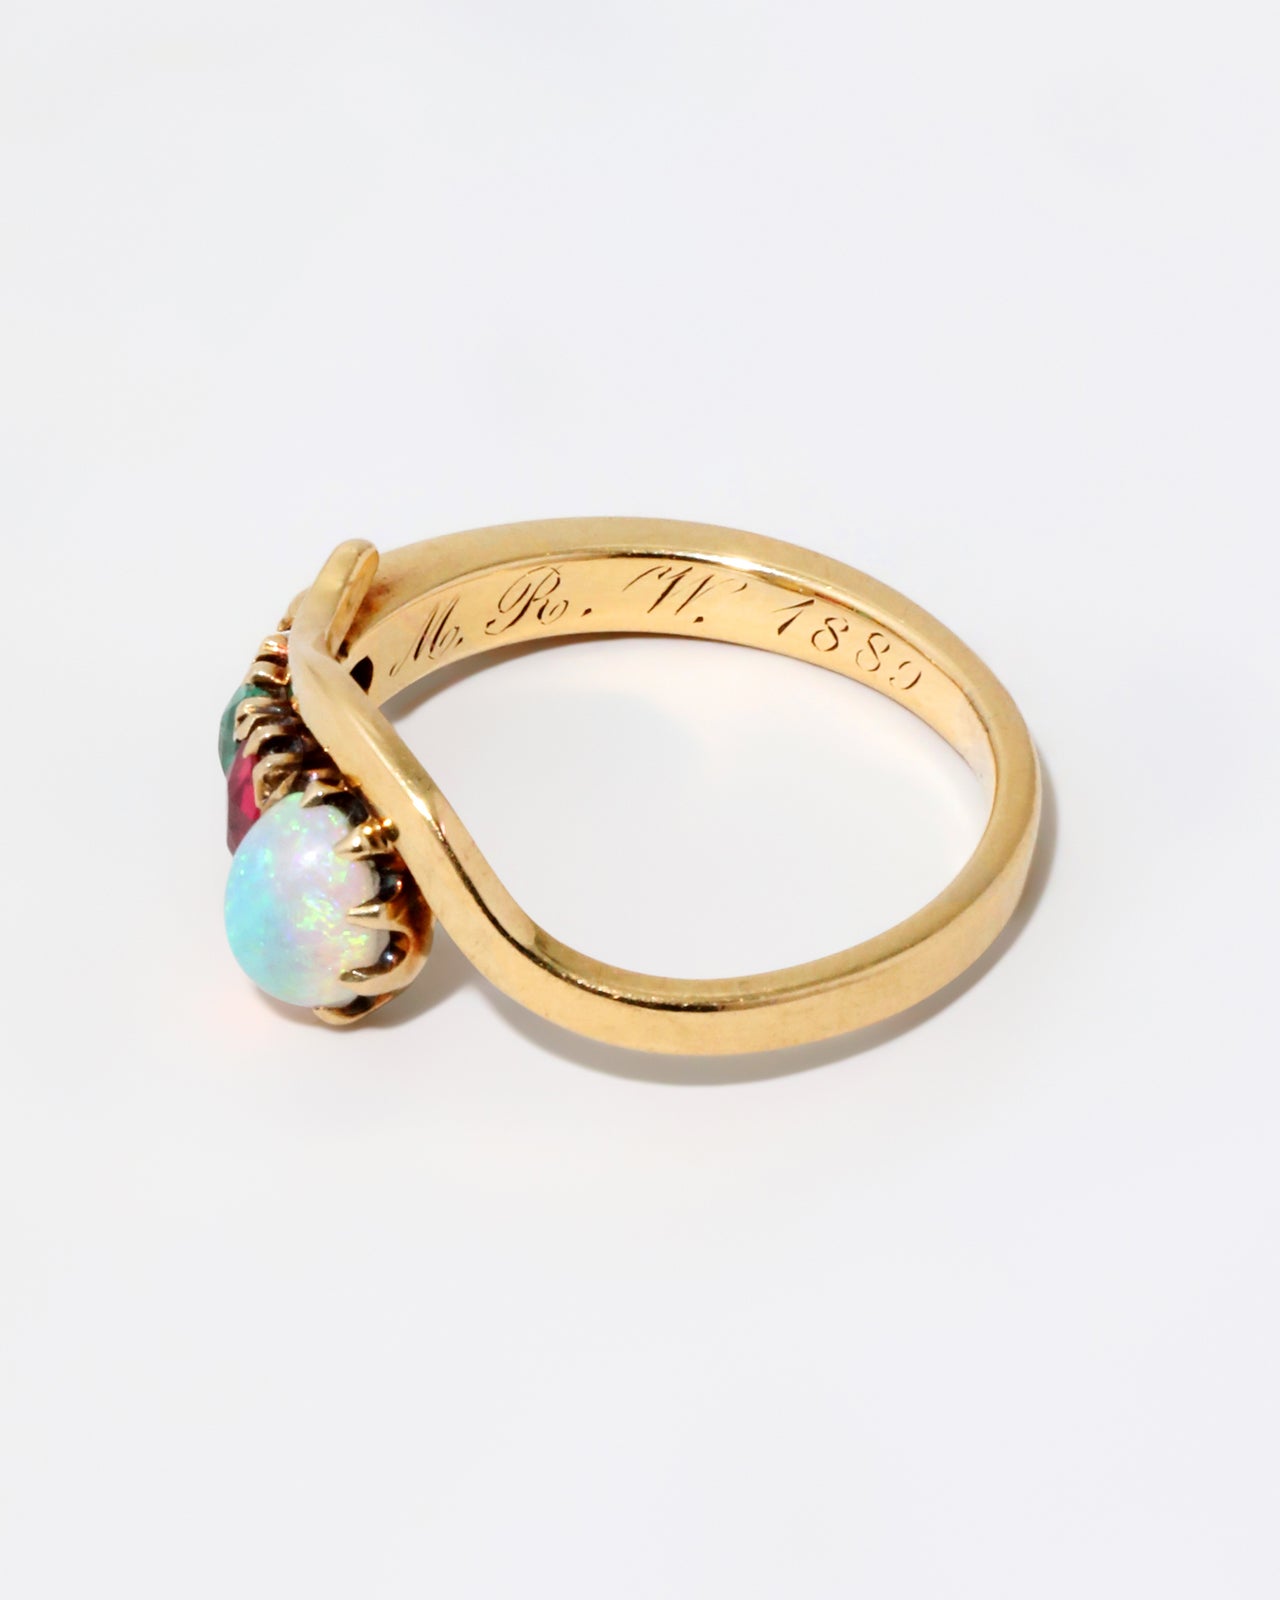 Antique Victorian 1889 14k Gold Opal Snake Ring - Photo 2